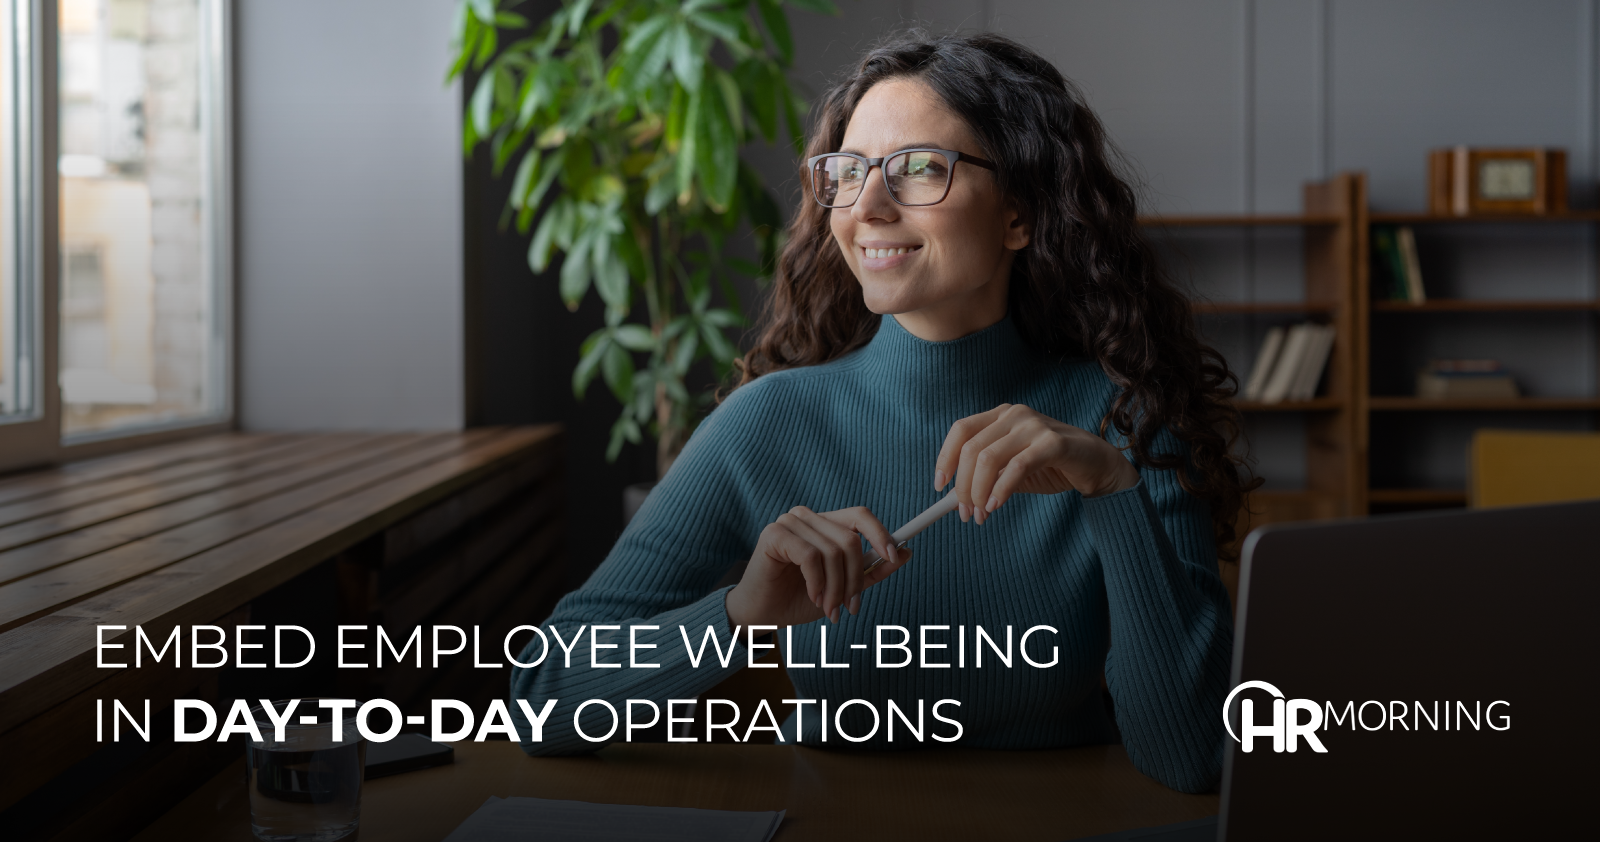 Embed employee well-being in day-to-day operations